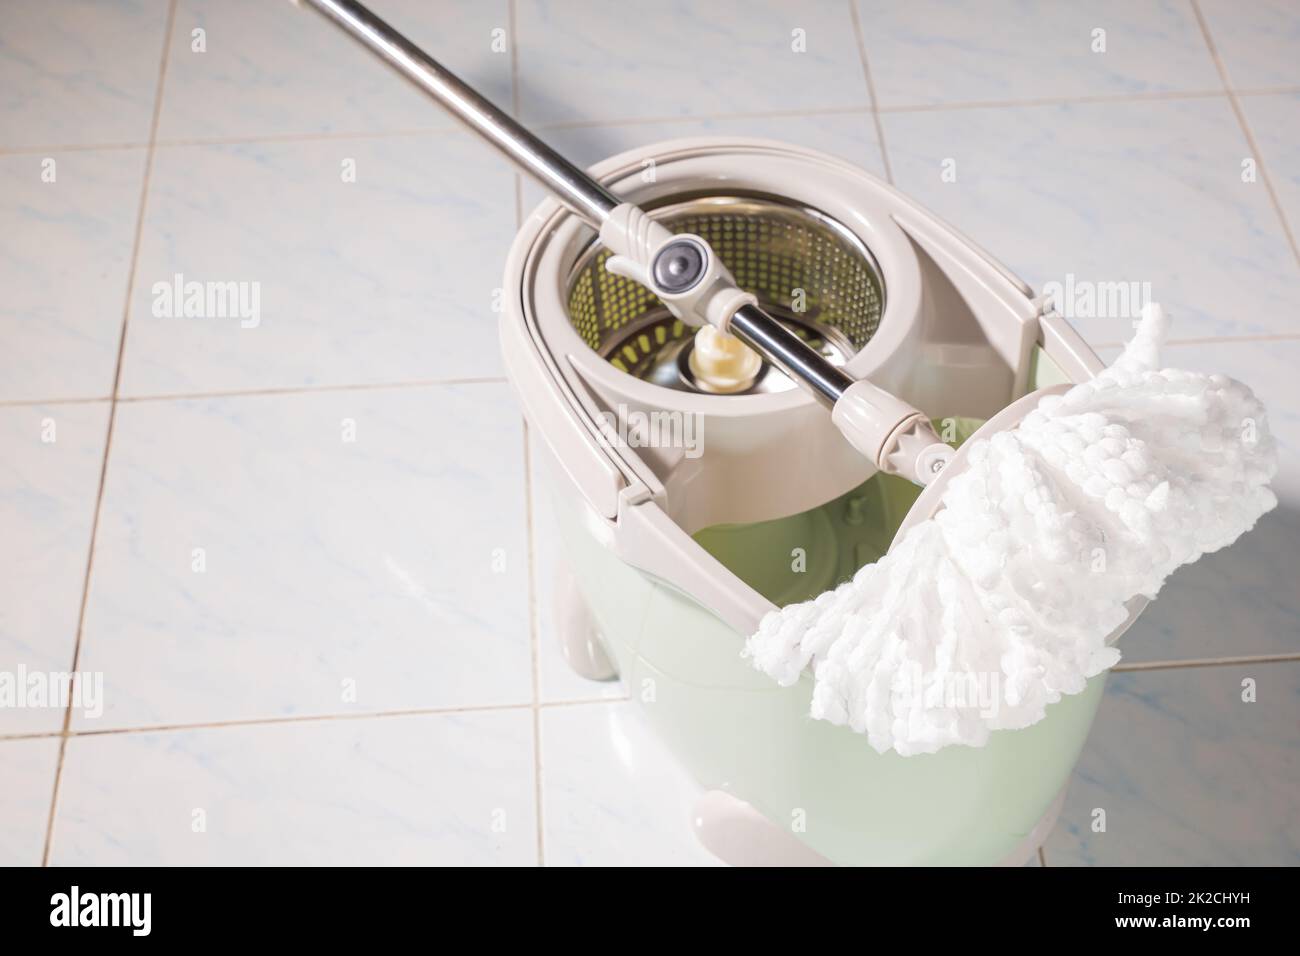 https://c8.alamy.com/comp/2K2CHYH/mop-with-microfiber-head-spinning-on-the-bucket-2K2CHYH.jpg